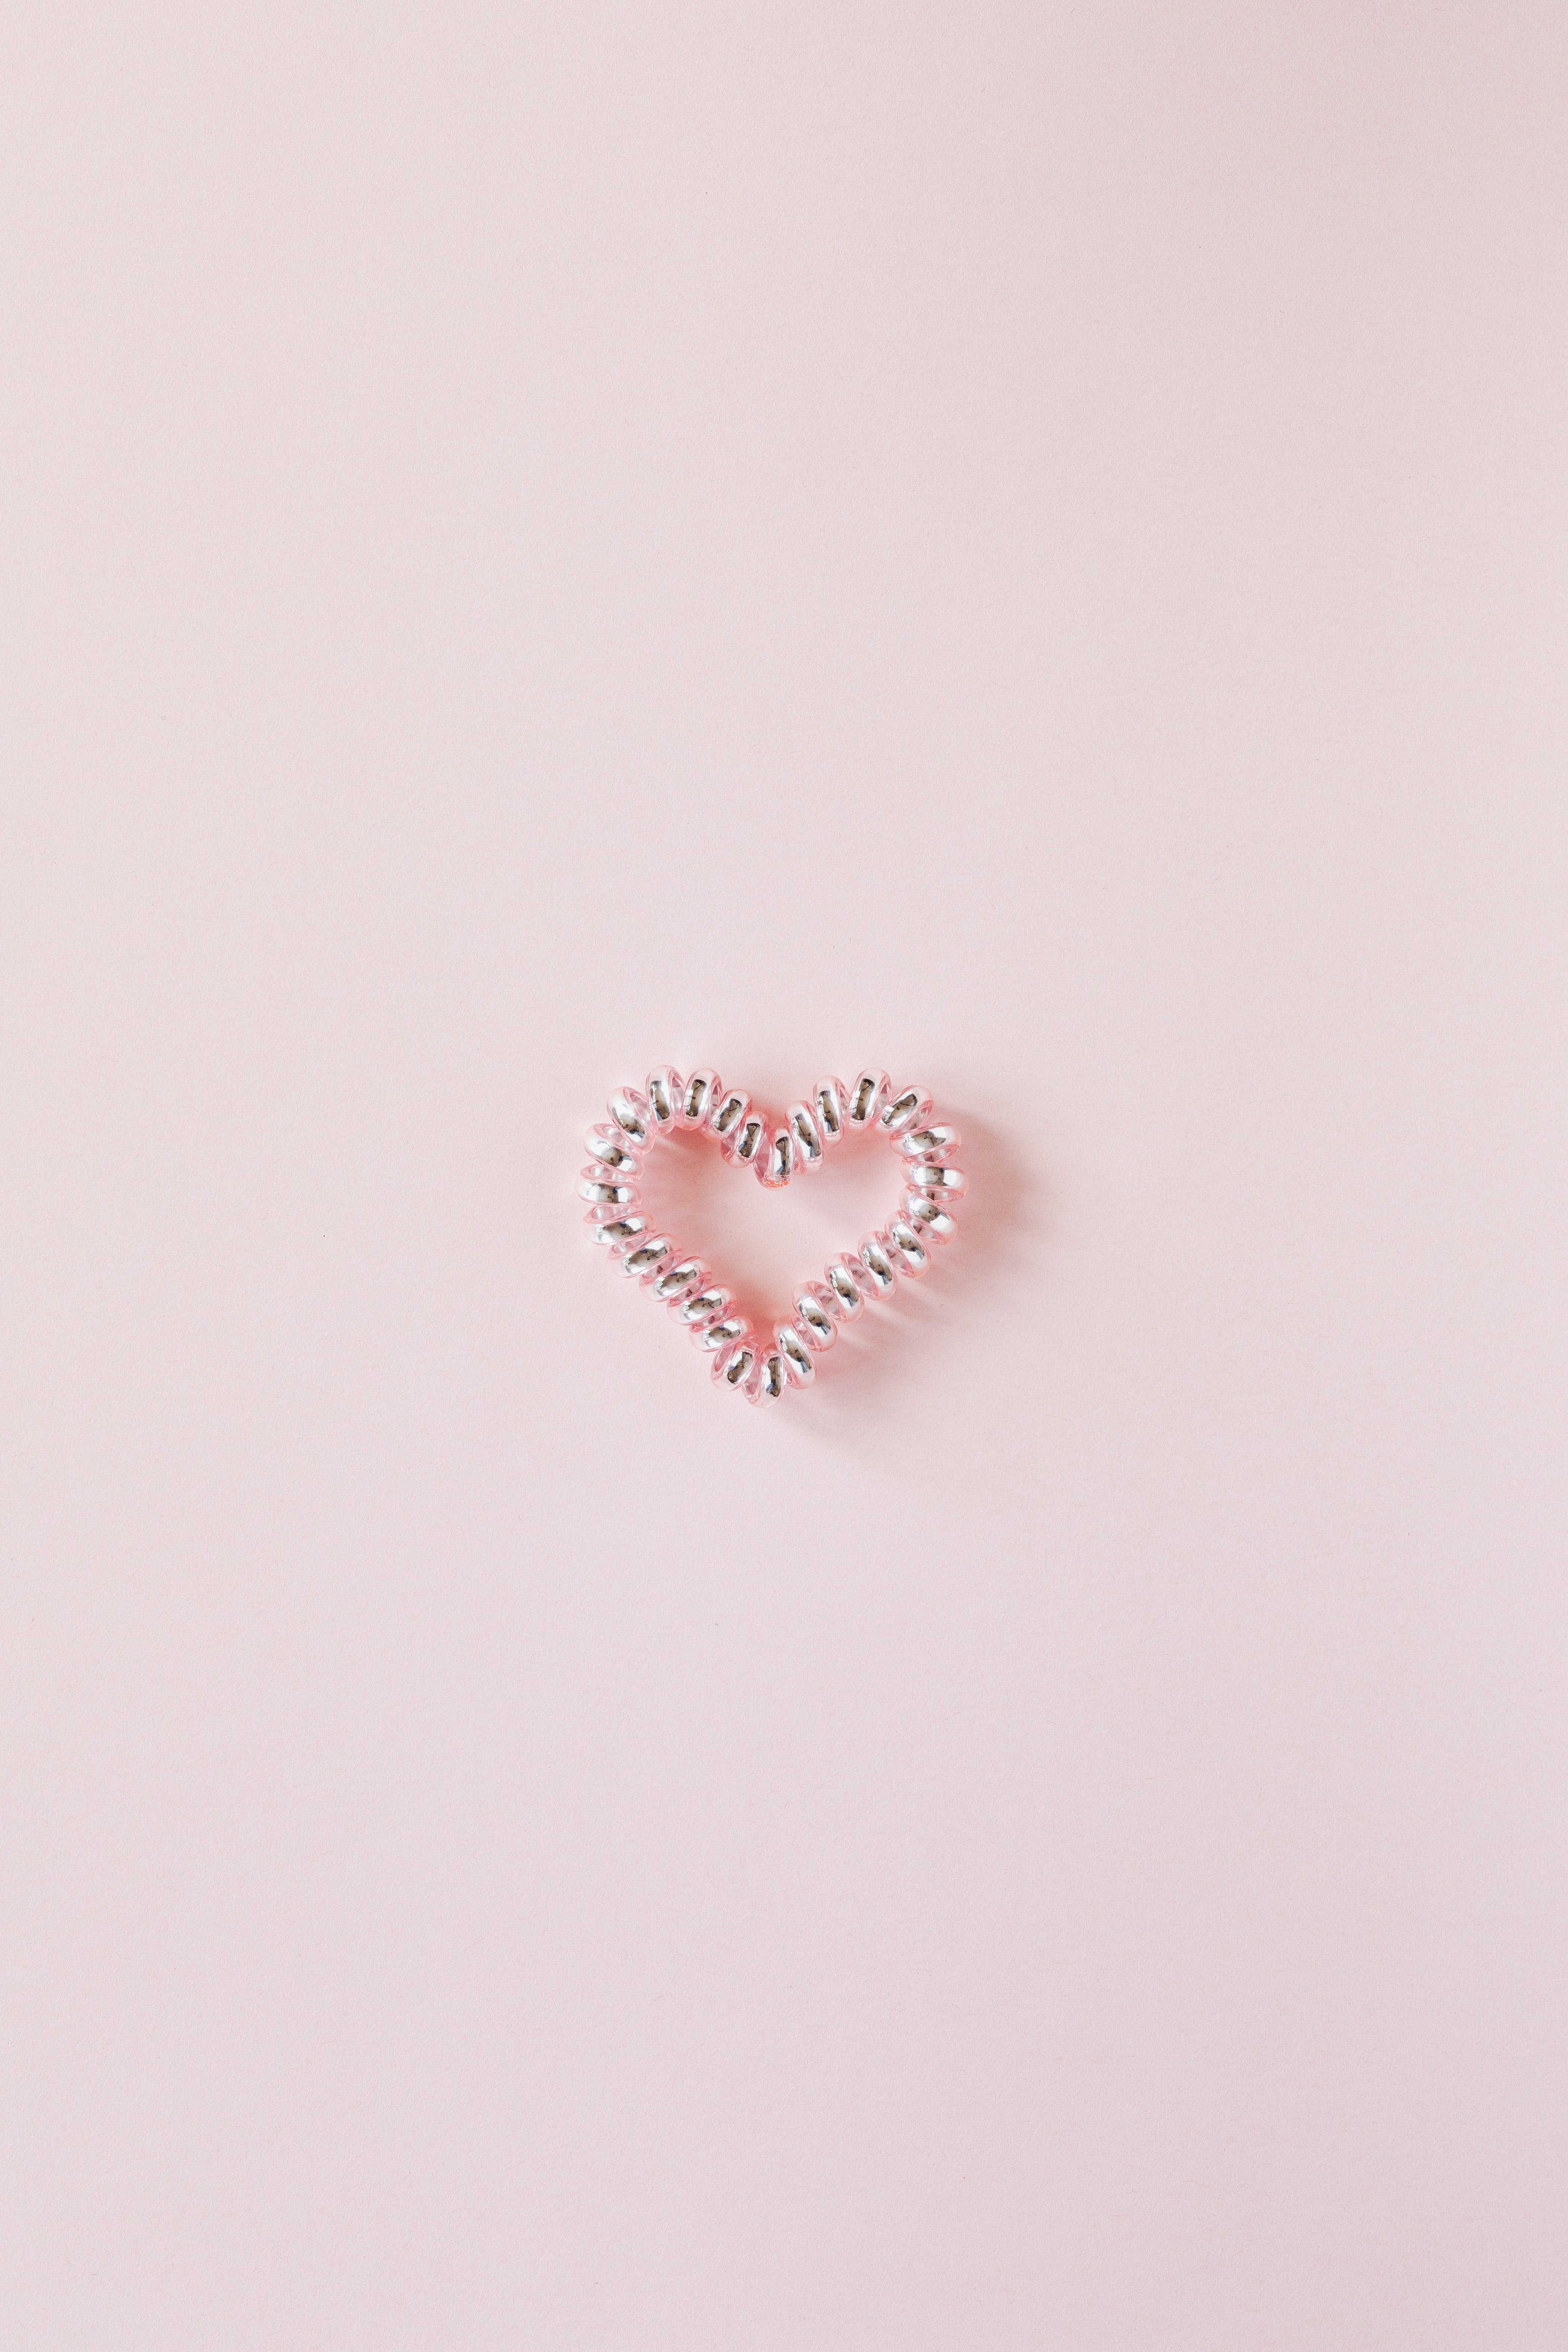 Light Pink Wallpaper for Iphone Aesthetic and Cute 31